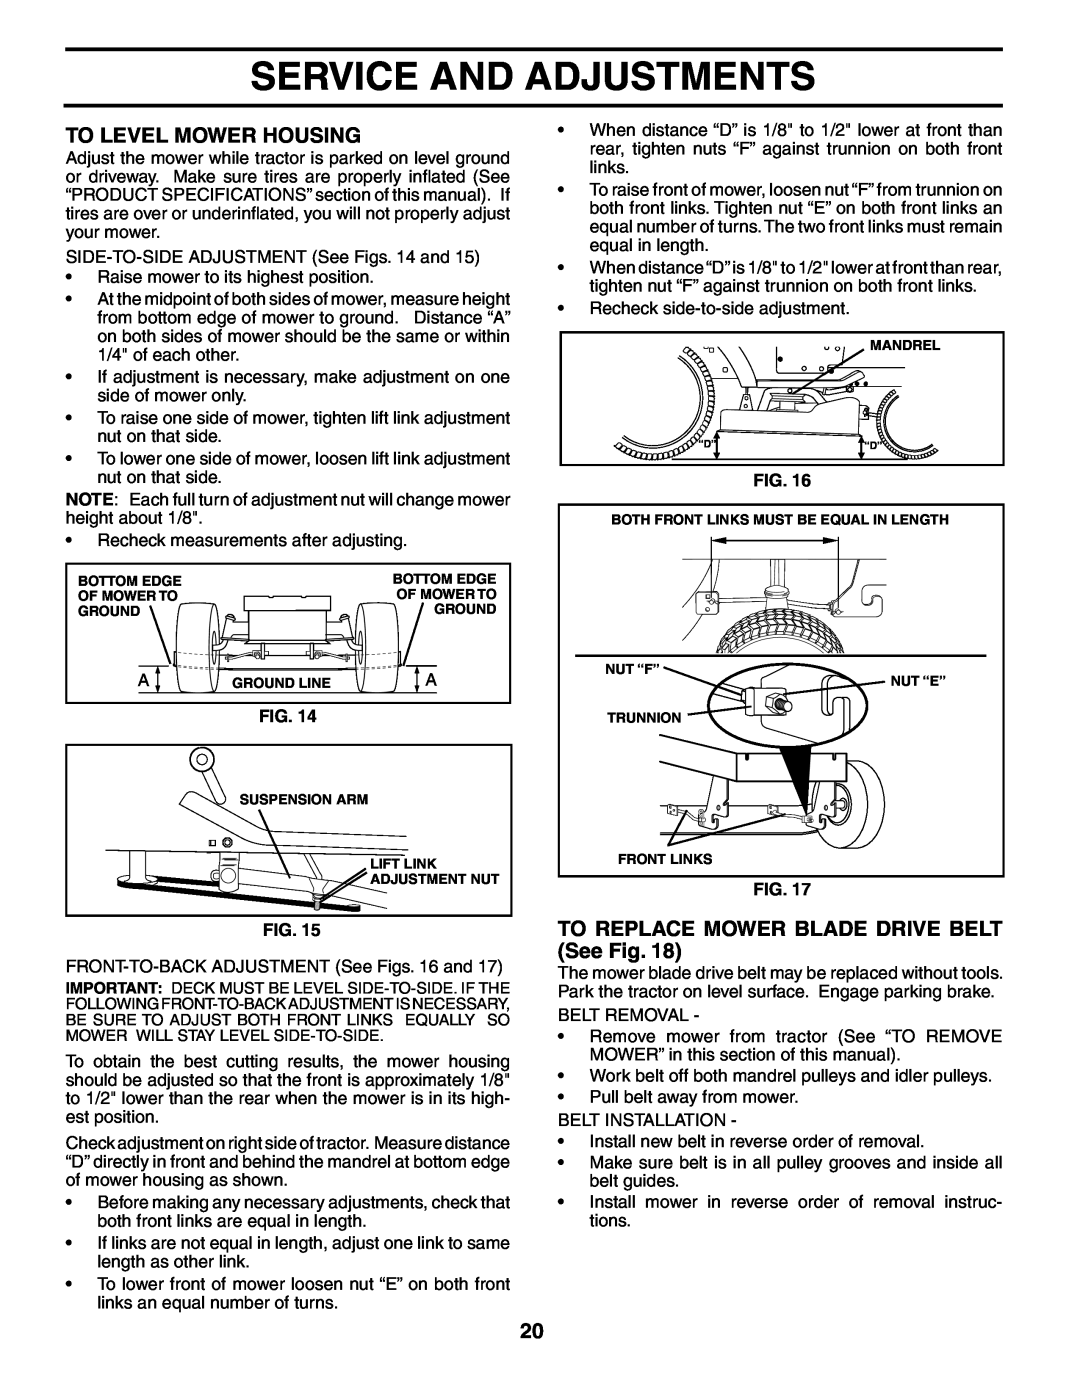 Poulan 195506 manual To Level Mower Housing, TO REPLACE MOWER BLADE DRIVE BELT See Fig, Service And Adjustments 